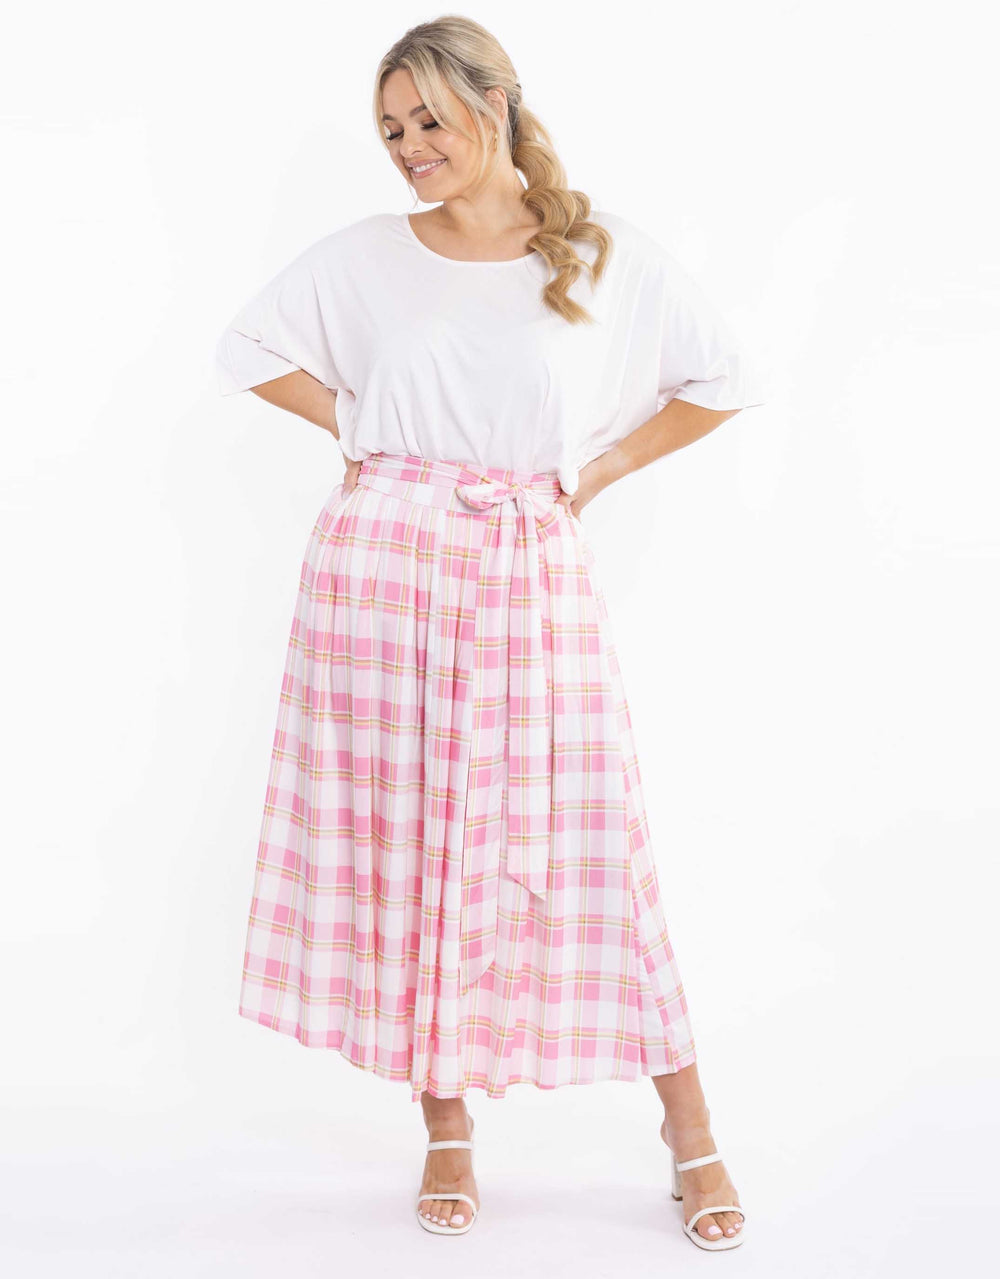 pq-collection-plus-size-twirl-tie-skirt-vintage-check-womens-plus-size-clothing